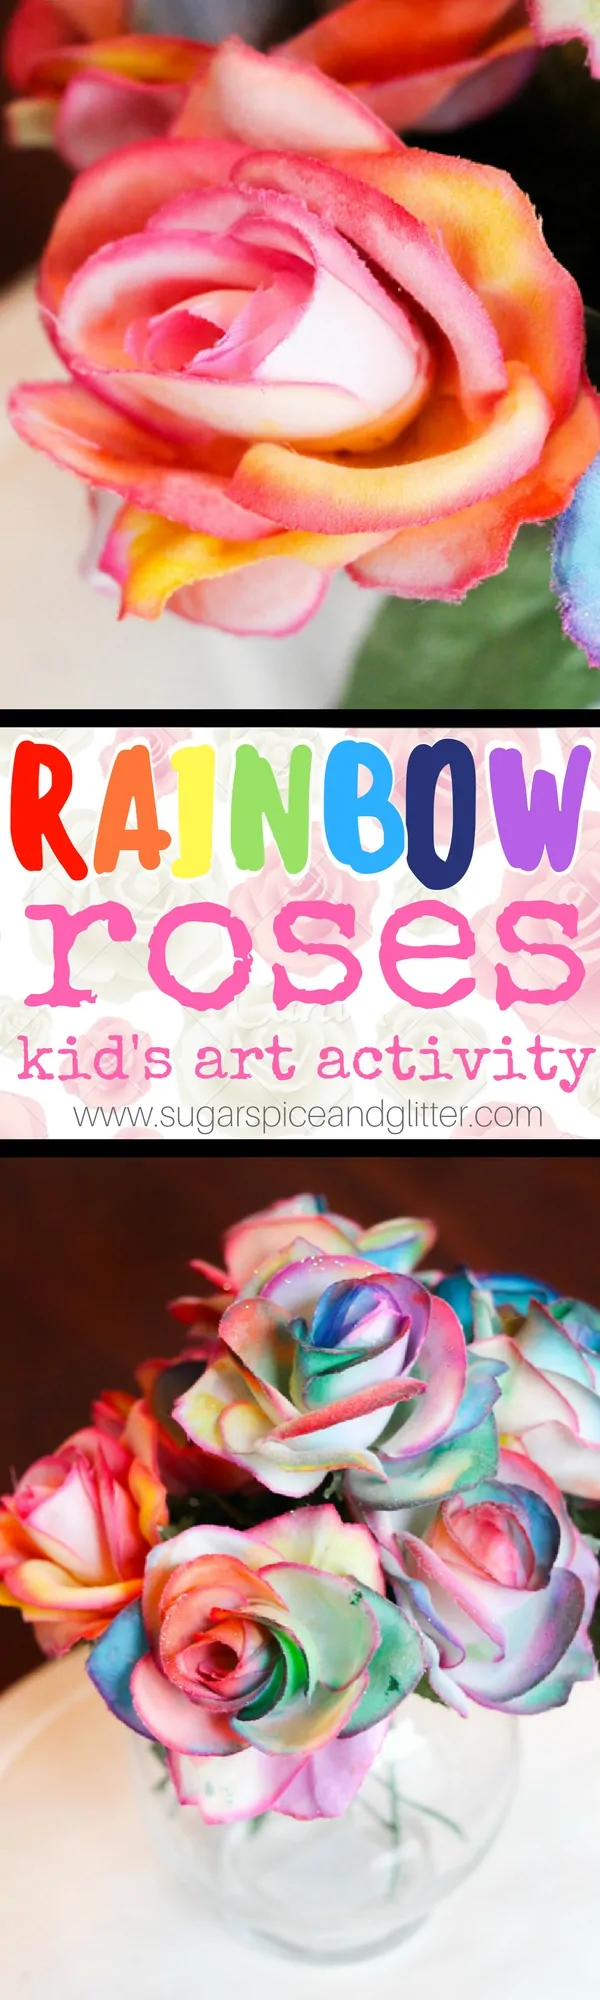 This easy rose craft for kids doubles as a beautiful Valentine's Day craft, Mother's Day craft - or just a pretty way to add some color to your home! An alice in wonderland inspired activity based on the Queen of Heart's painting the roses red